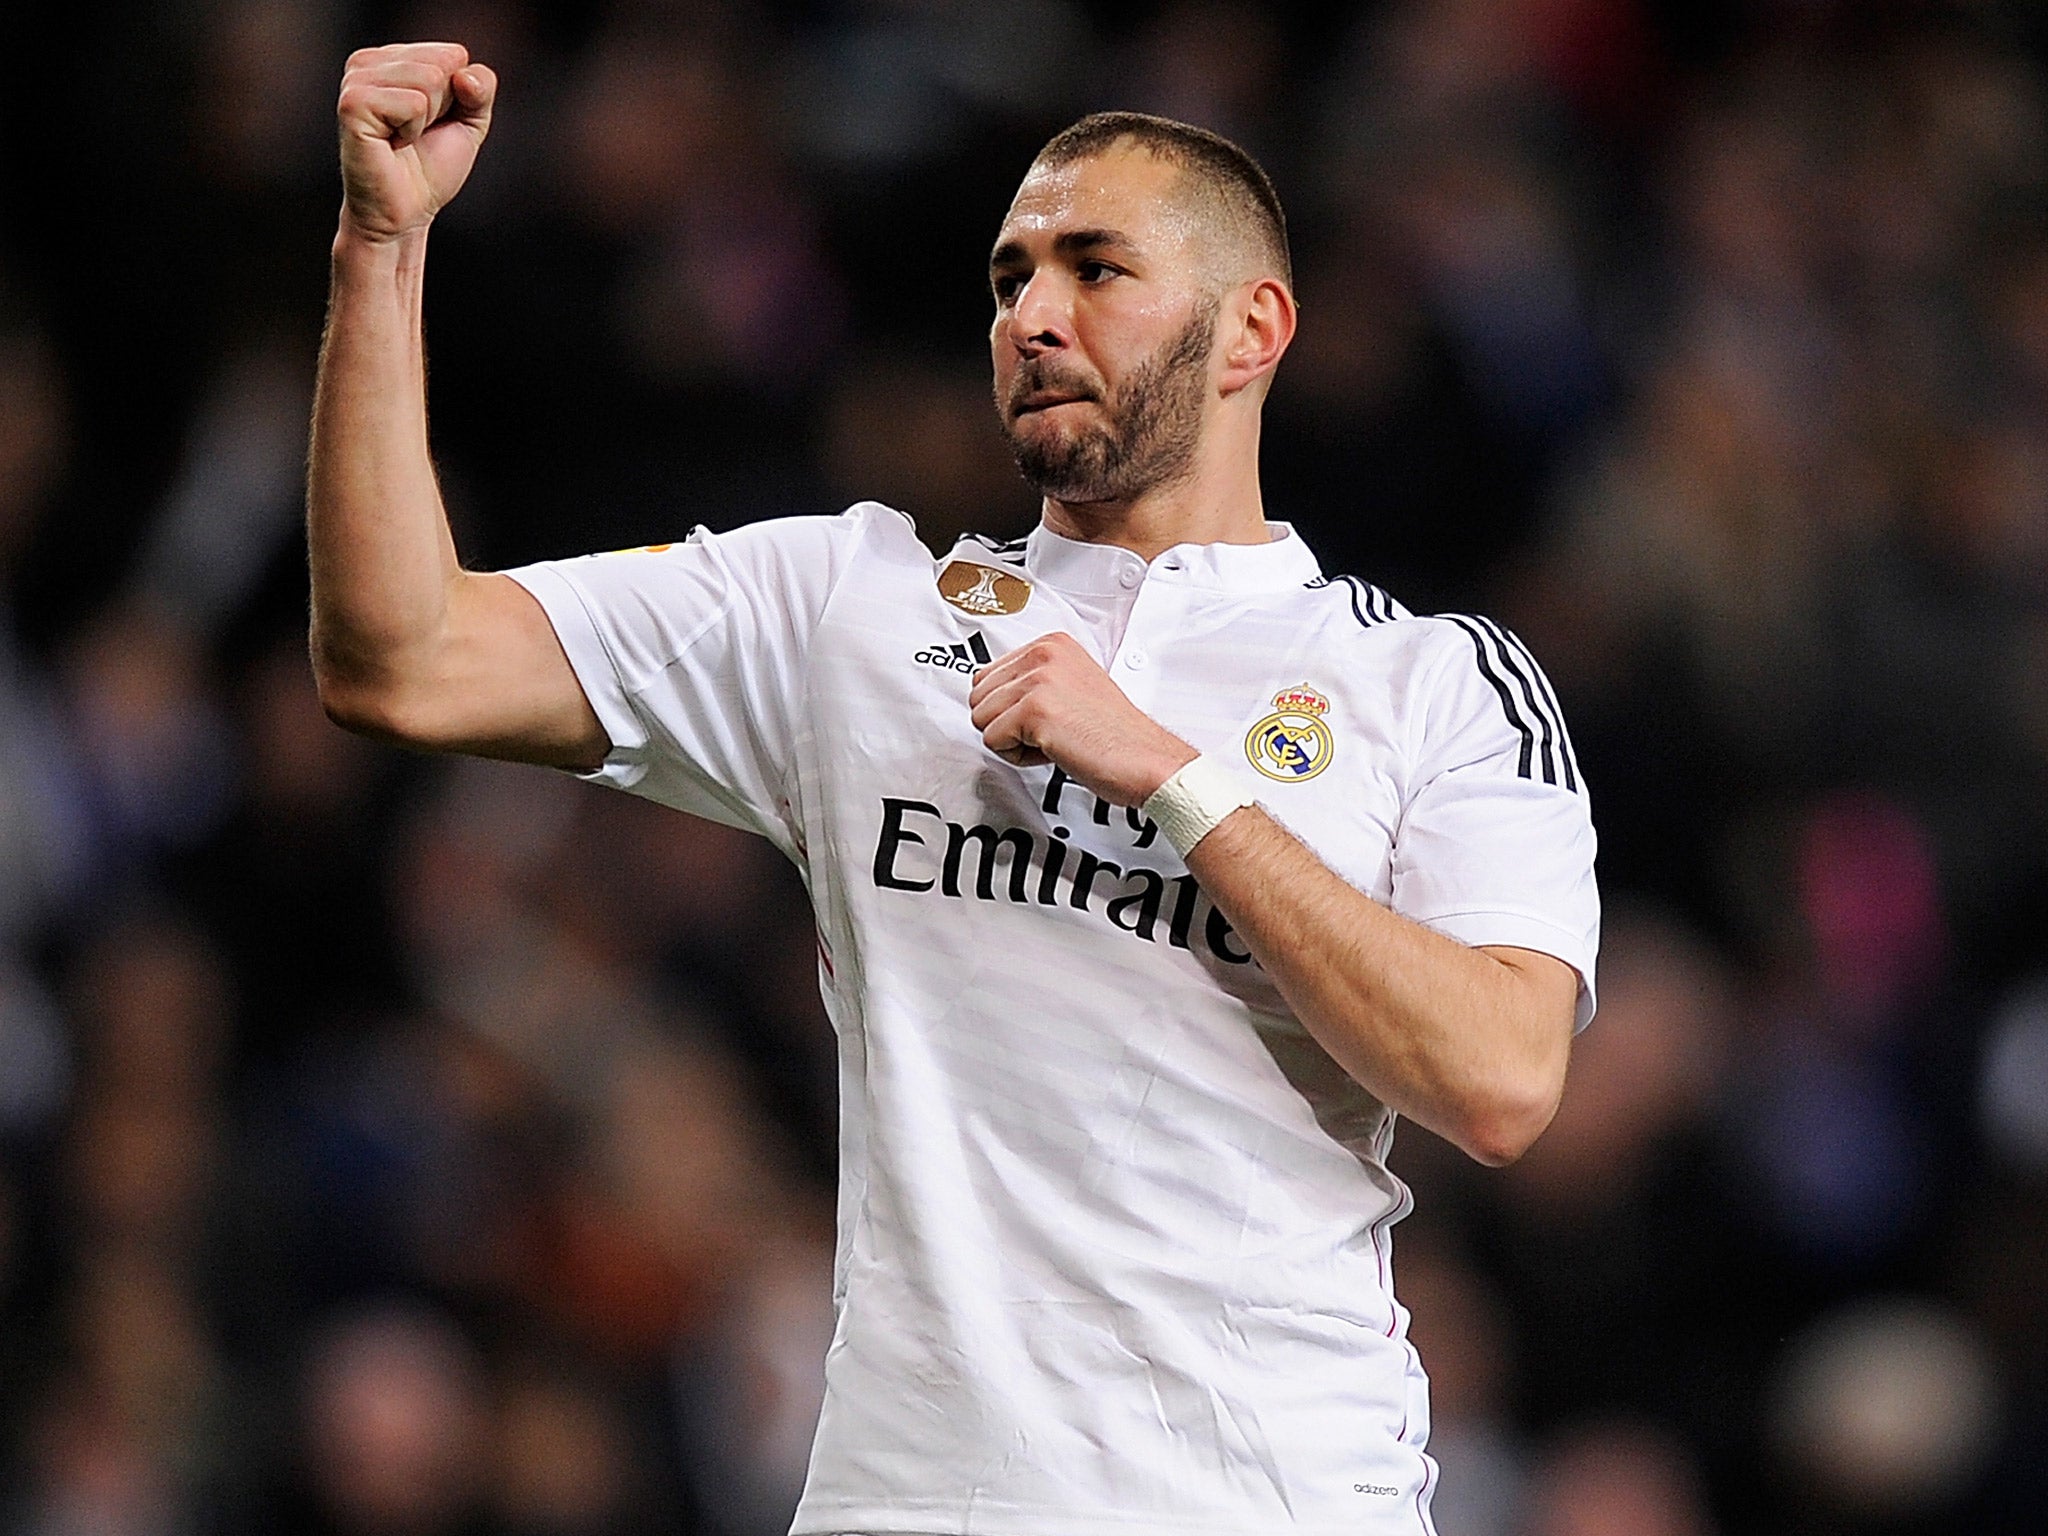 Karim Benzema has been linked with a move to Arsenal